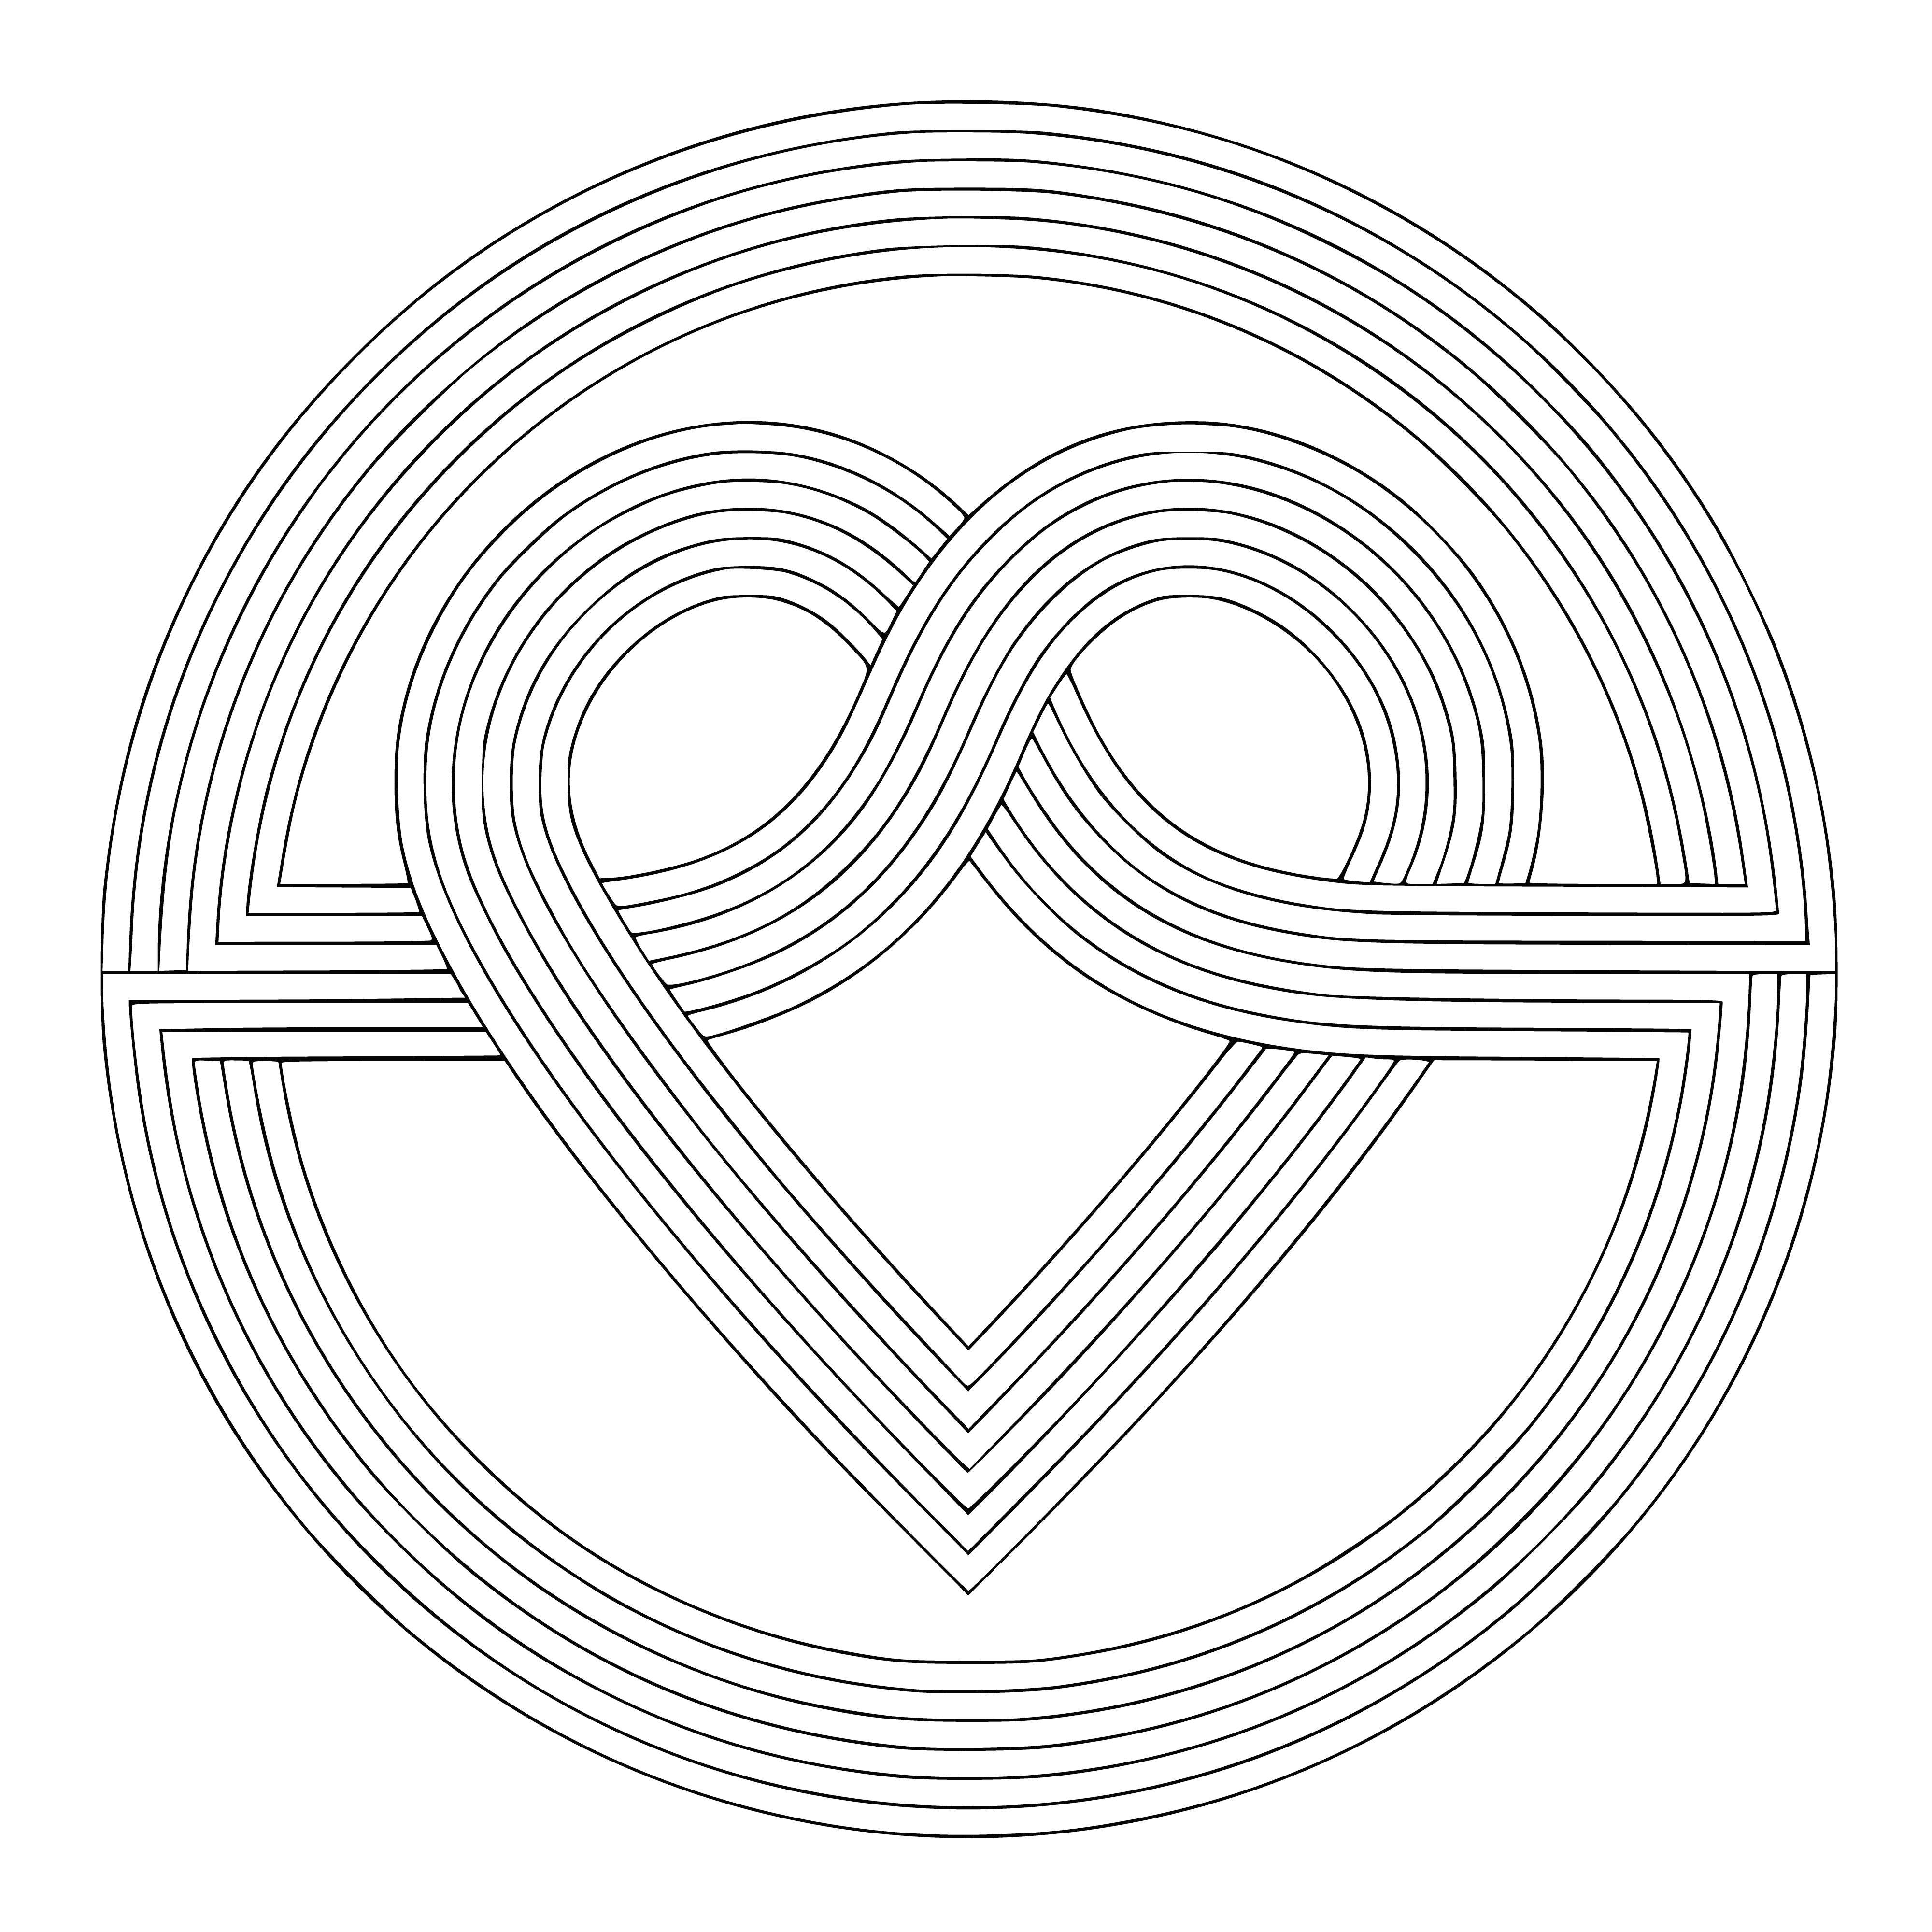 coloring page: 3 mandalas w/ intricate patterns & shapes creating a cohesive design. Coloring them can be therapeutic & relaxing as it requires focus & concentration.